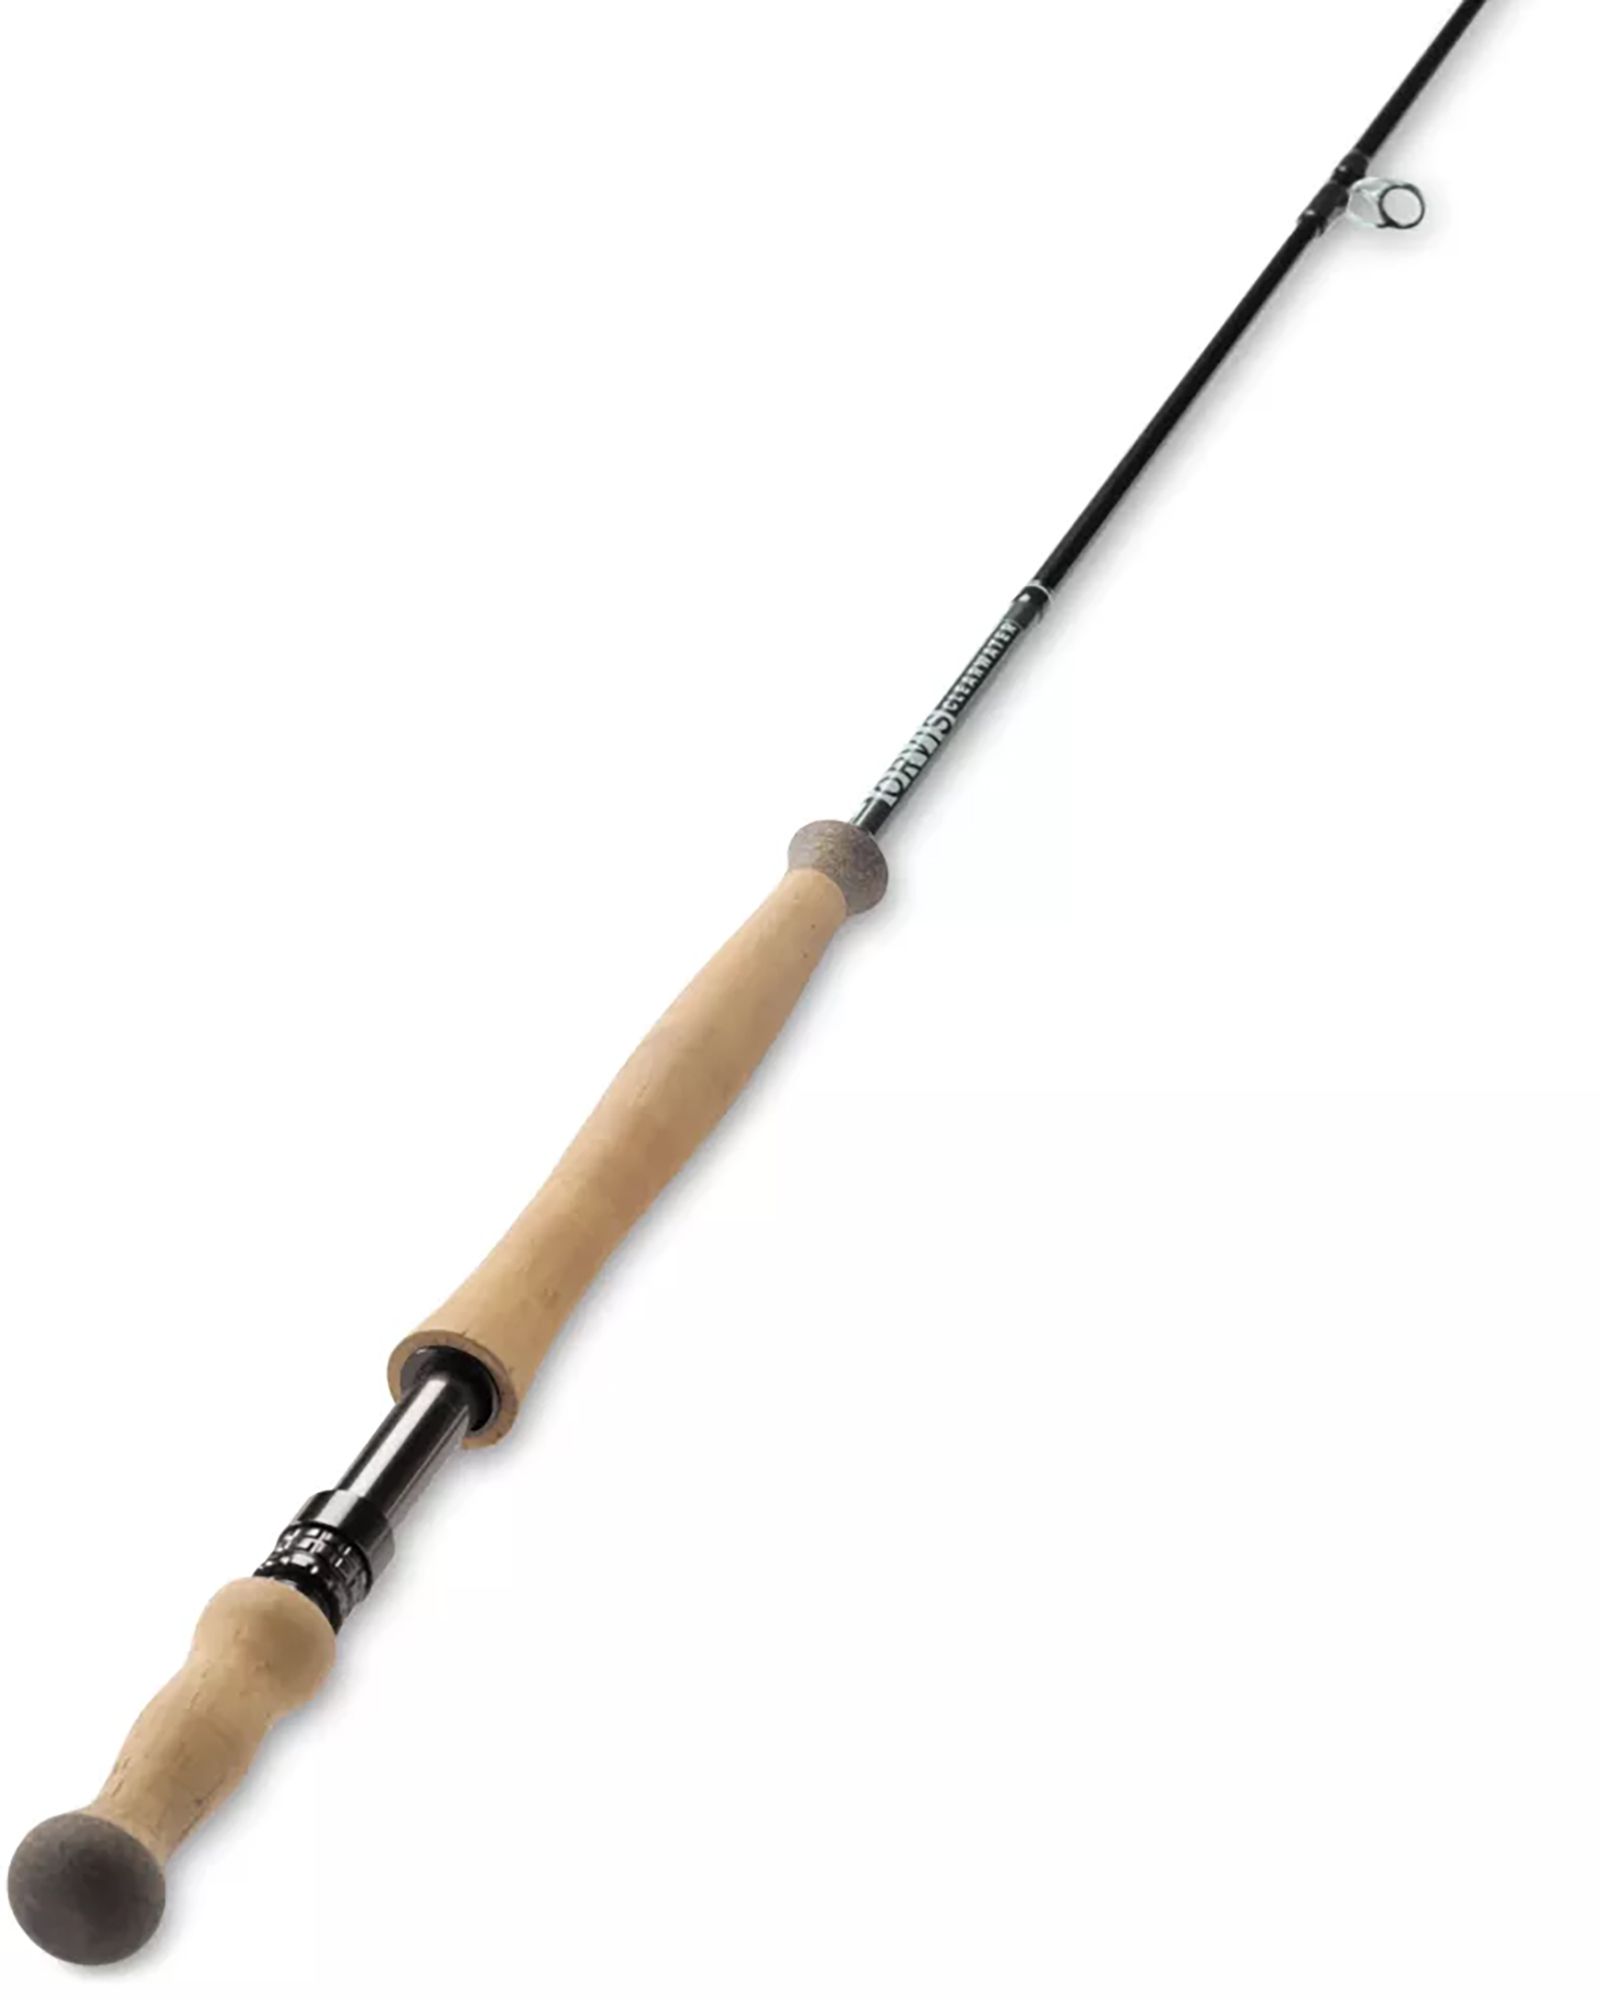 Photos - Other for Fishing Orvis Clearwater Two Handed Fly rod 22UVPACWRD13684XXROD 